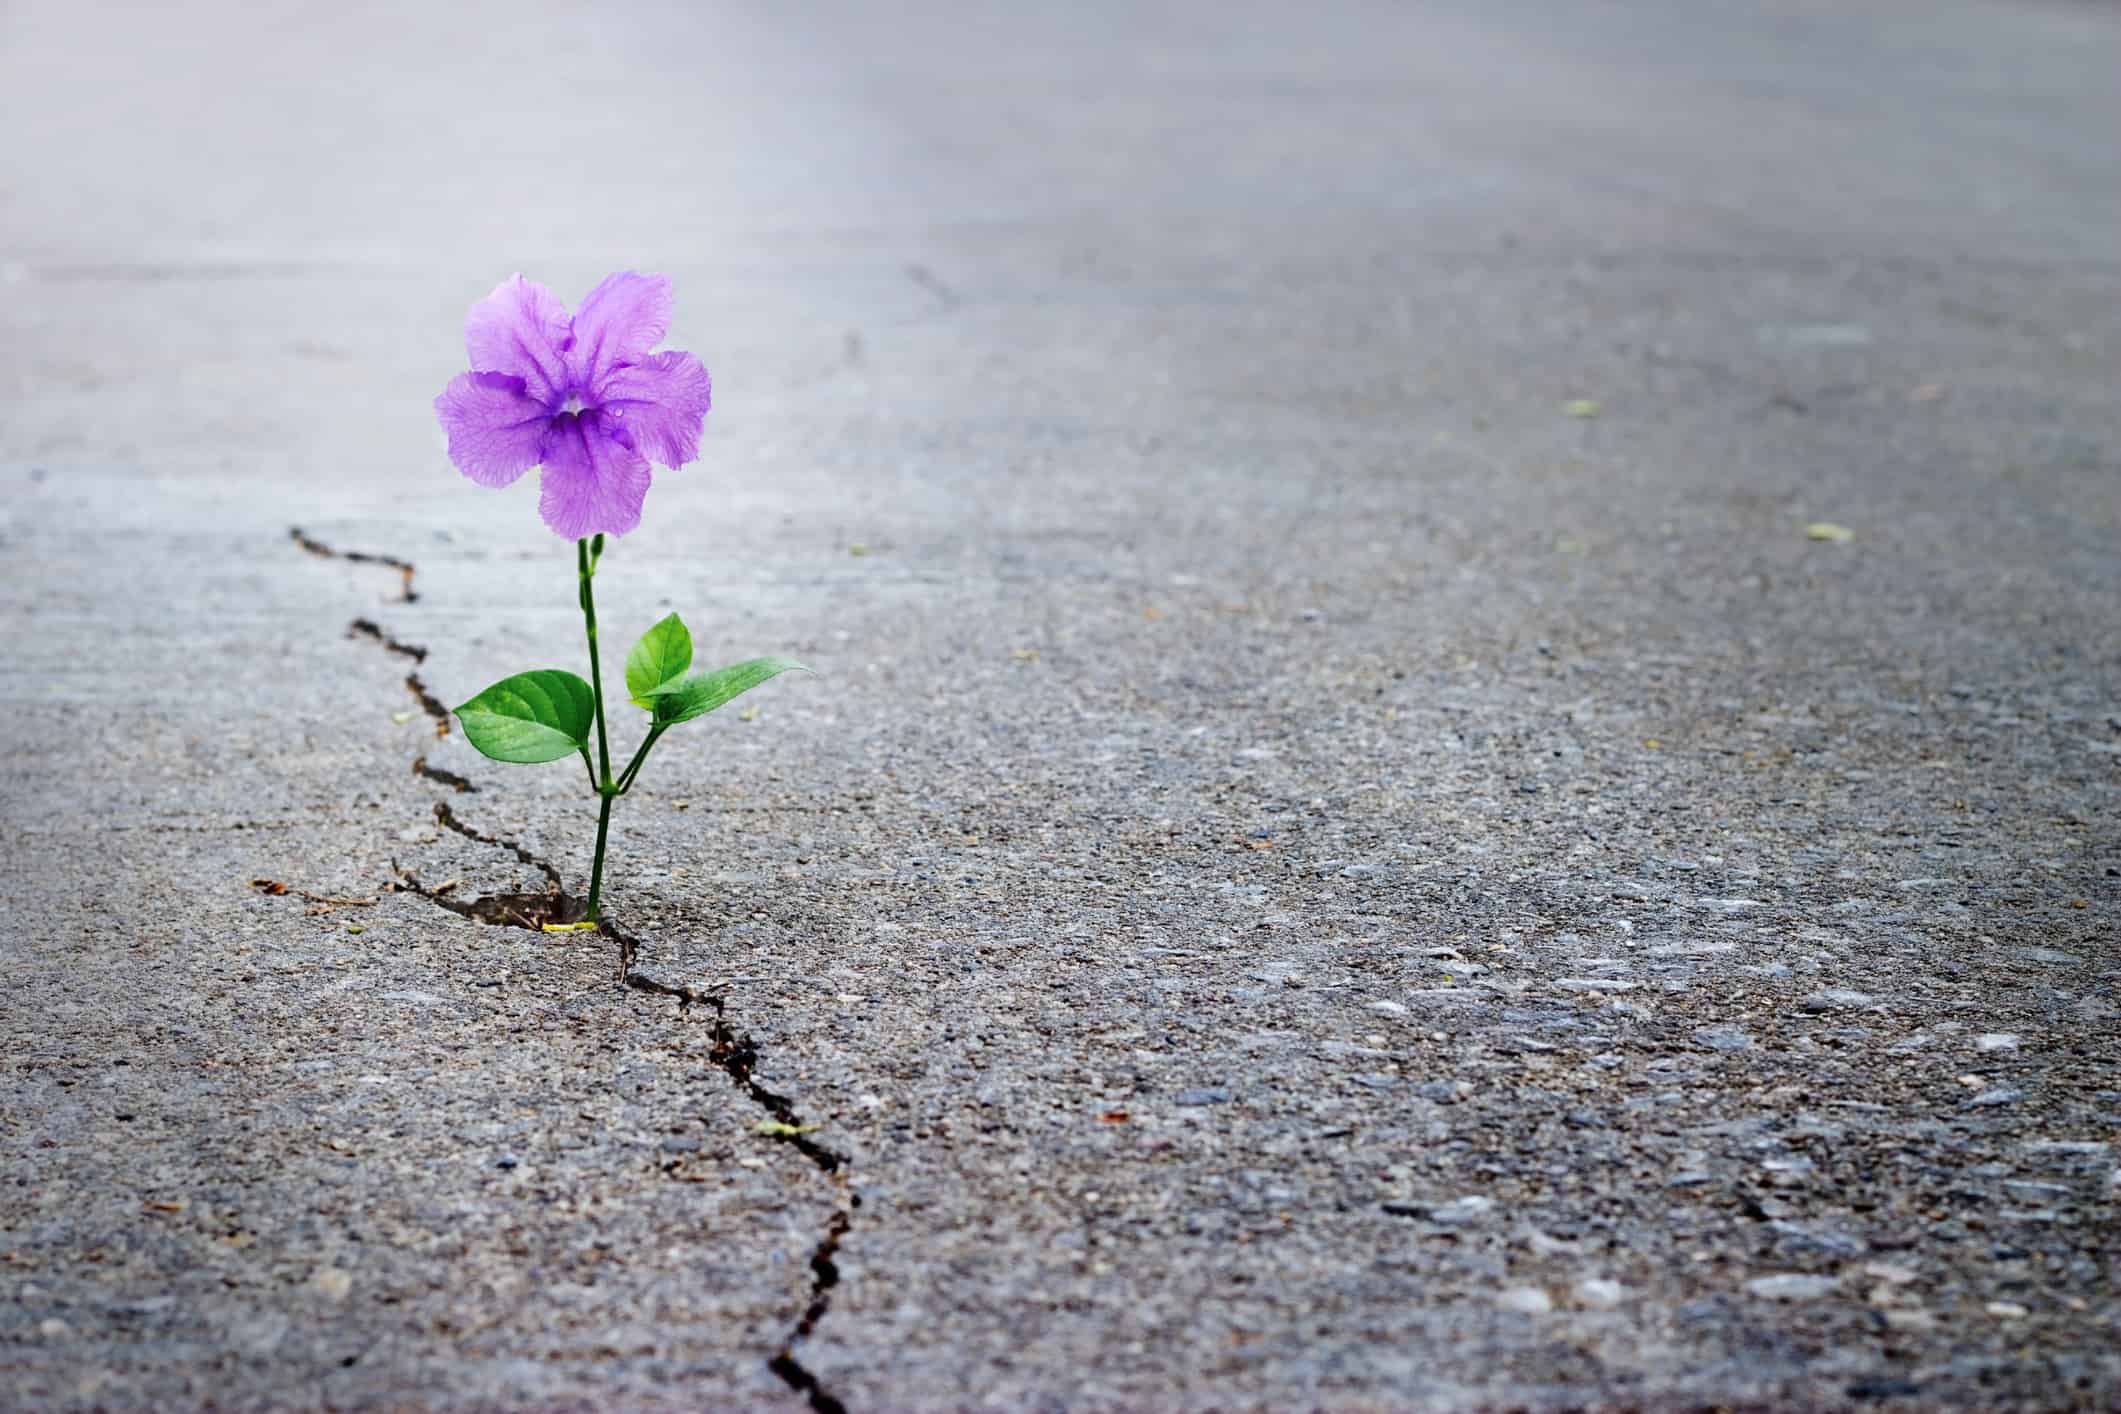 A small flower grows out of a concrete crack.